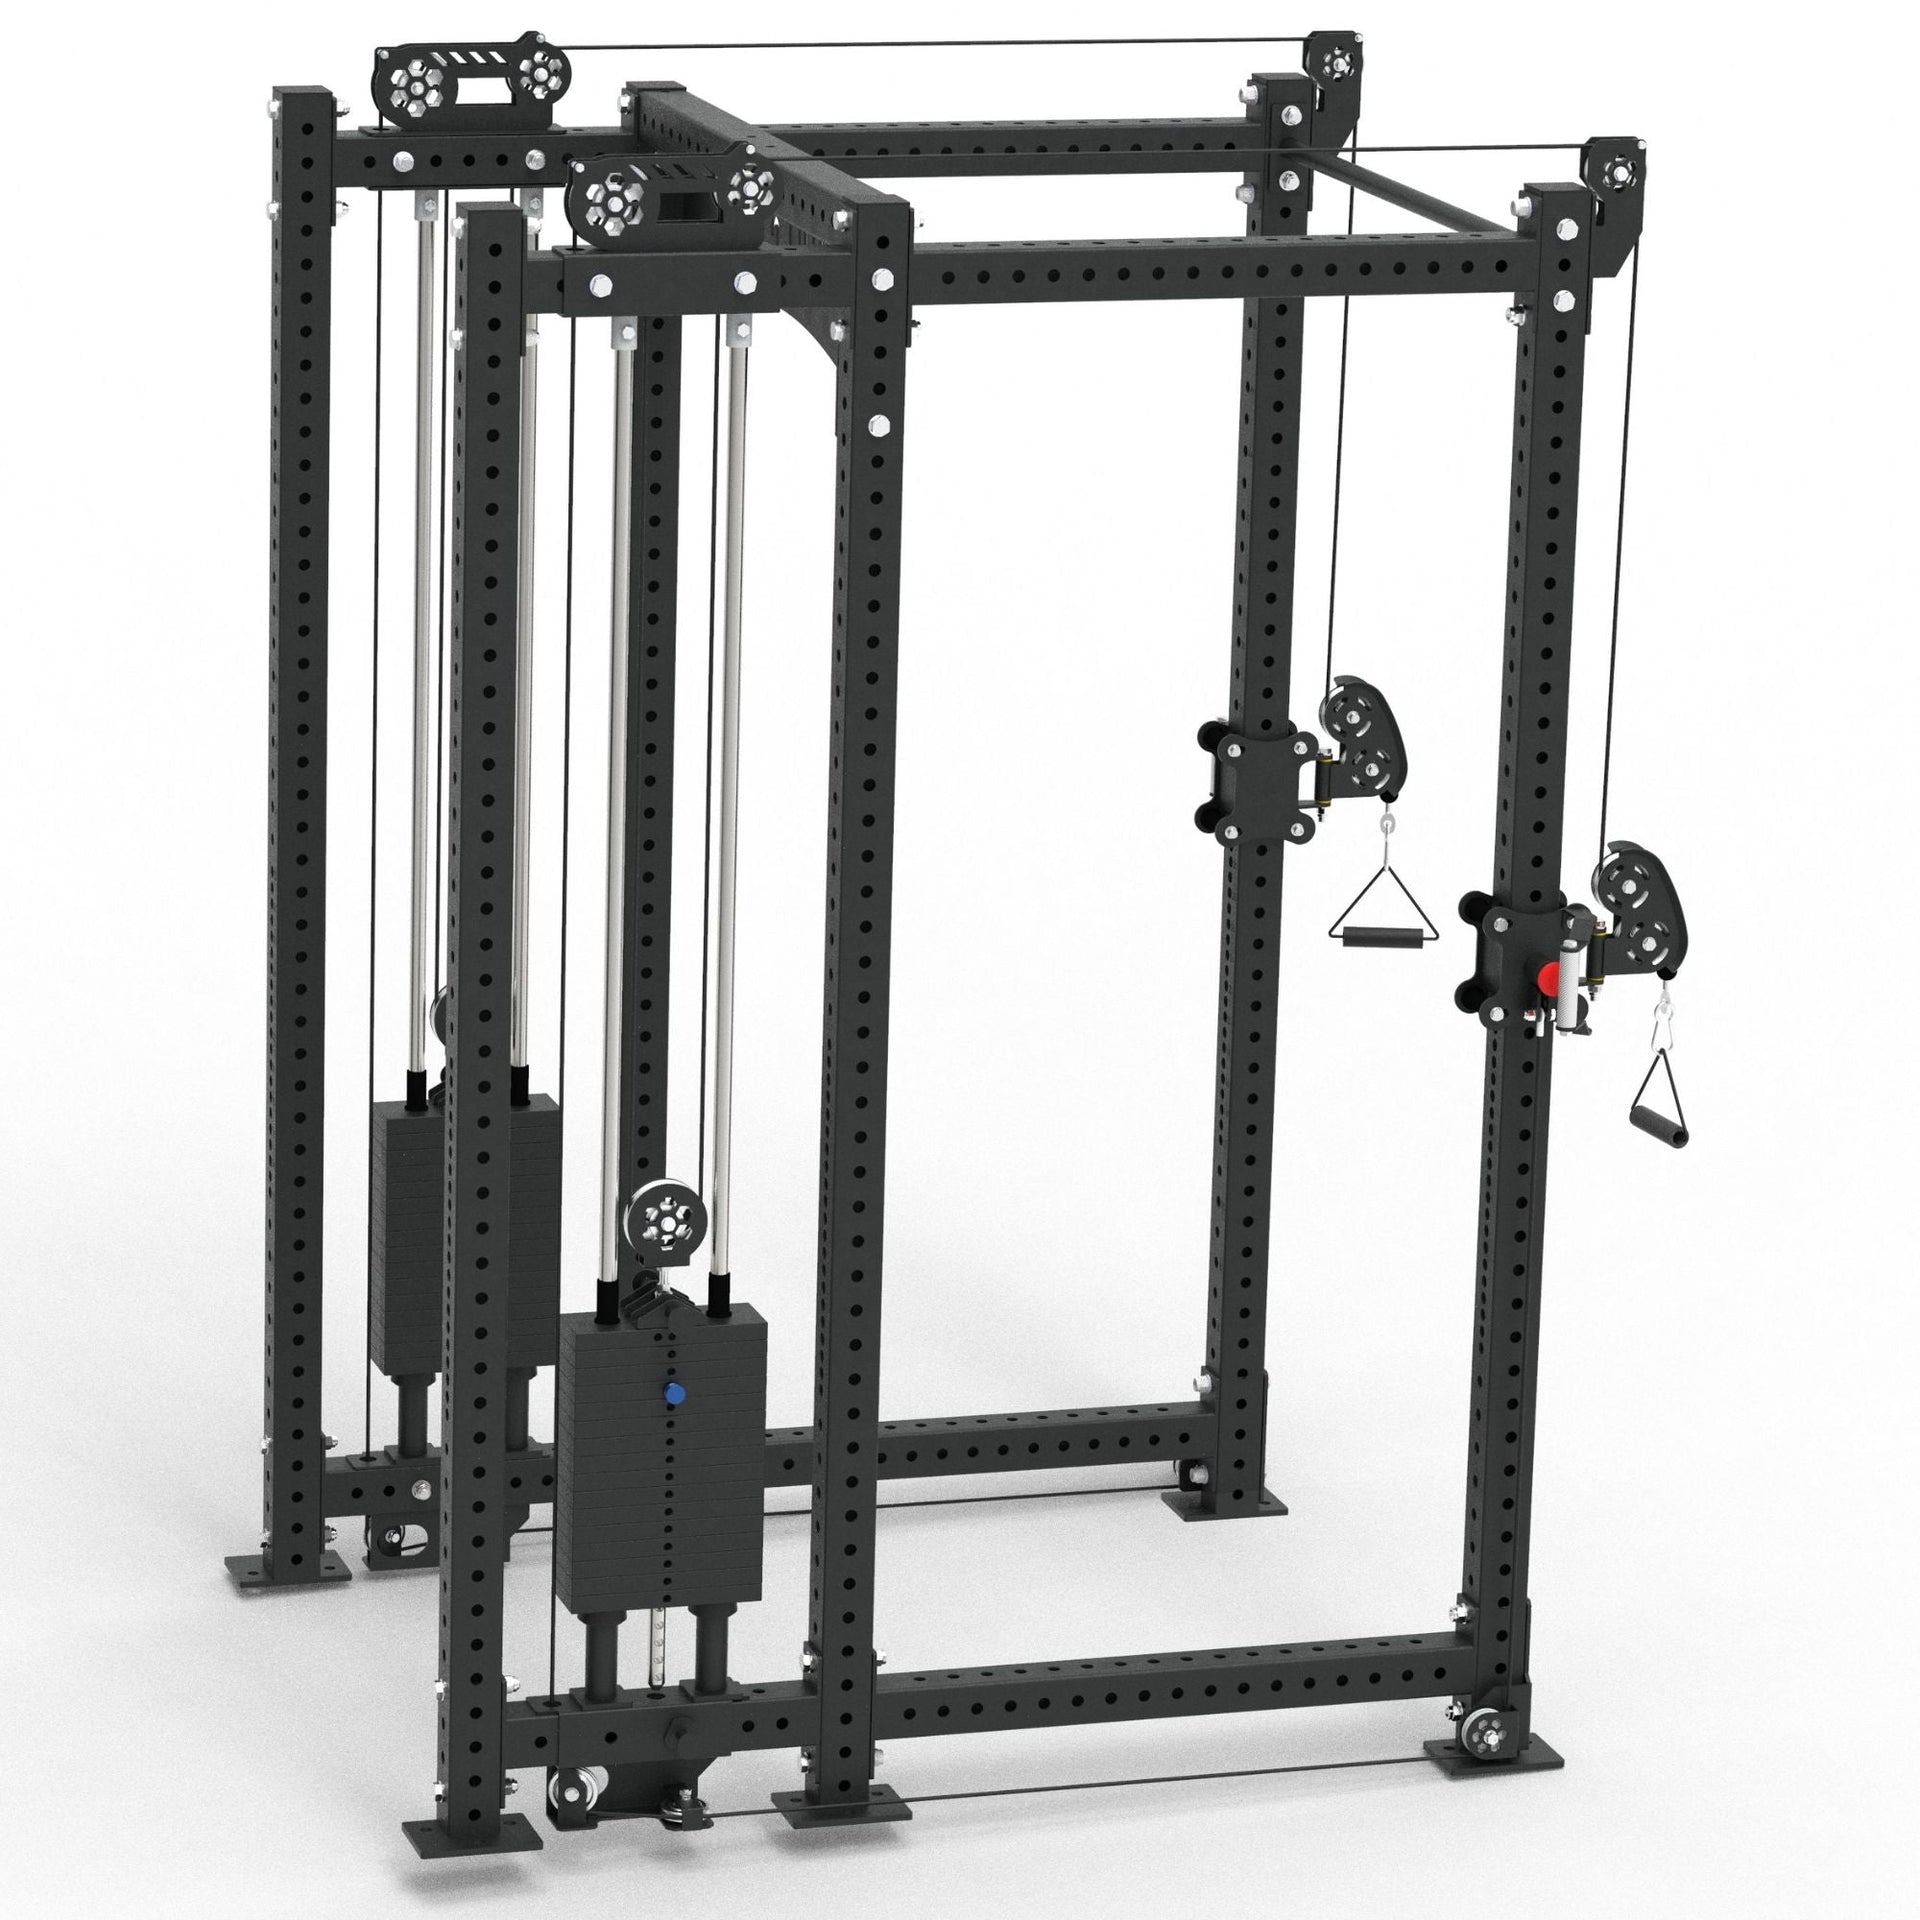 Commercial Power Rack with Olympus Attachment